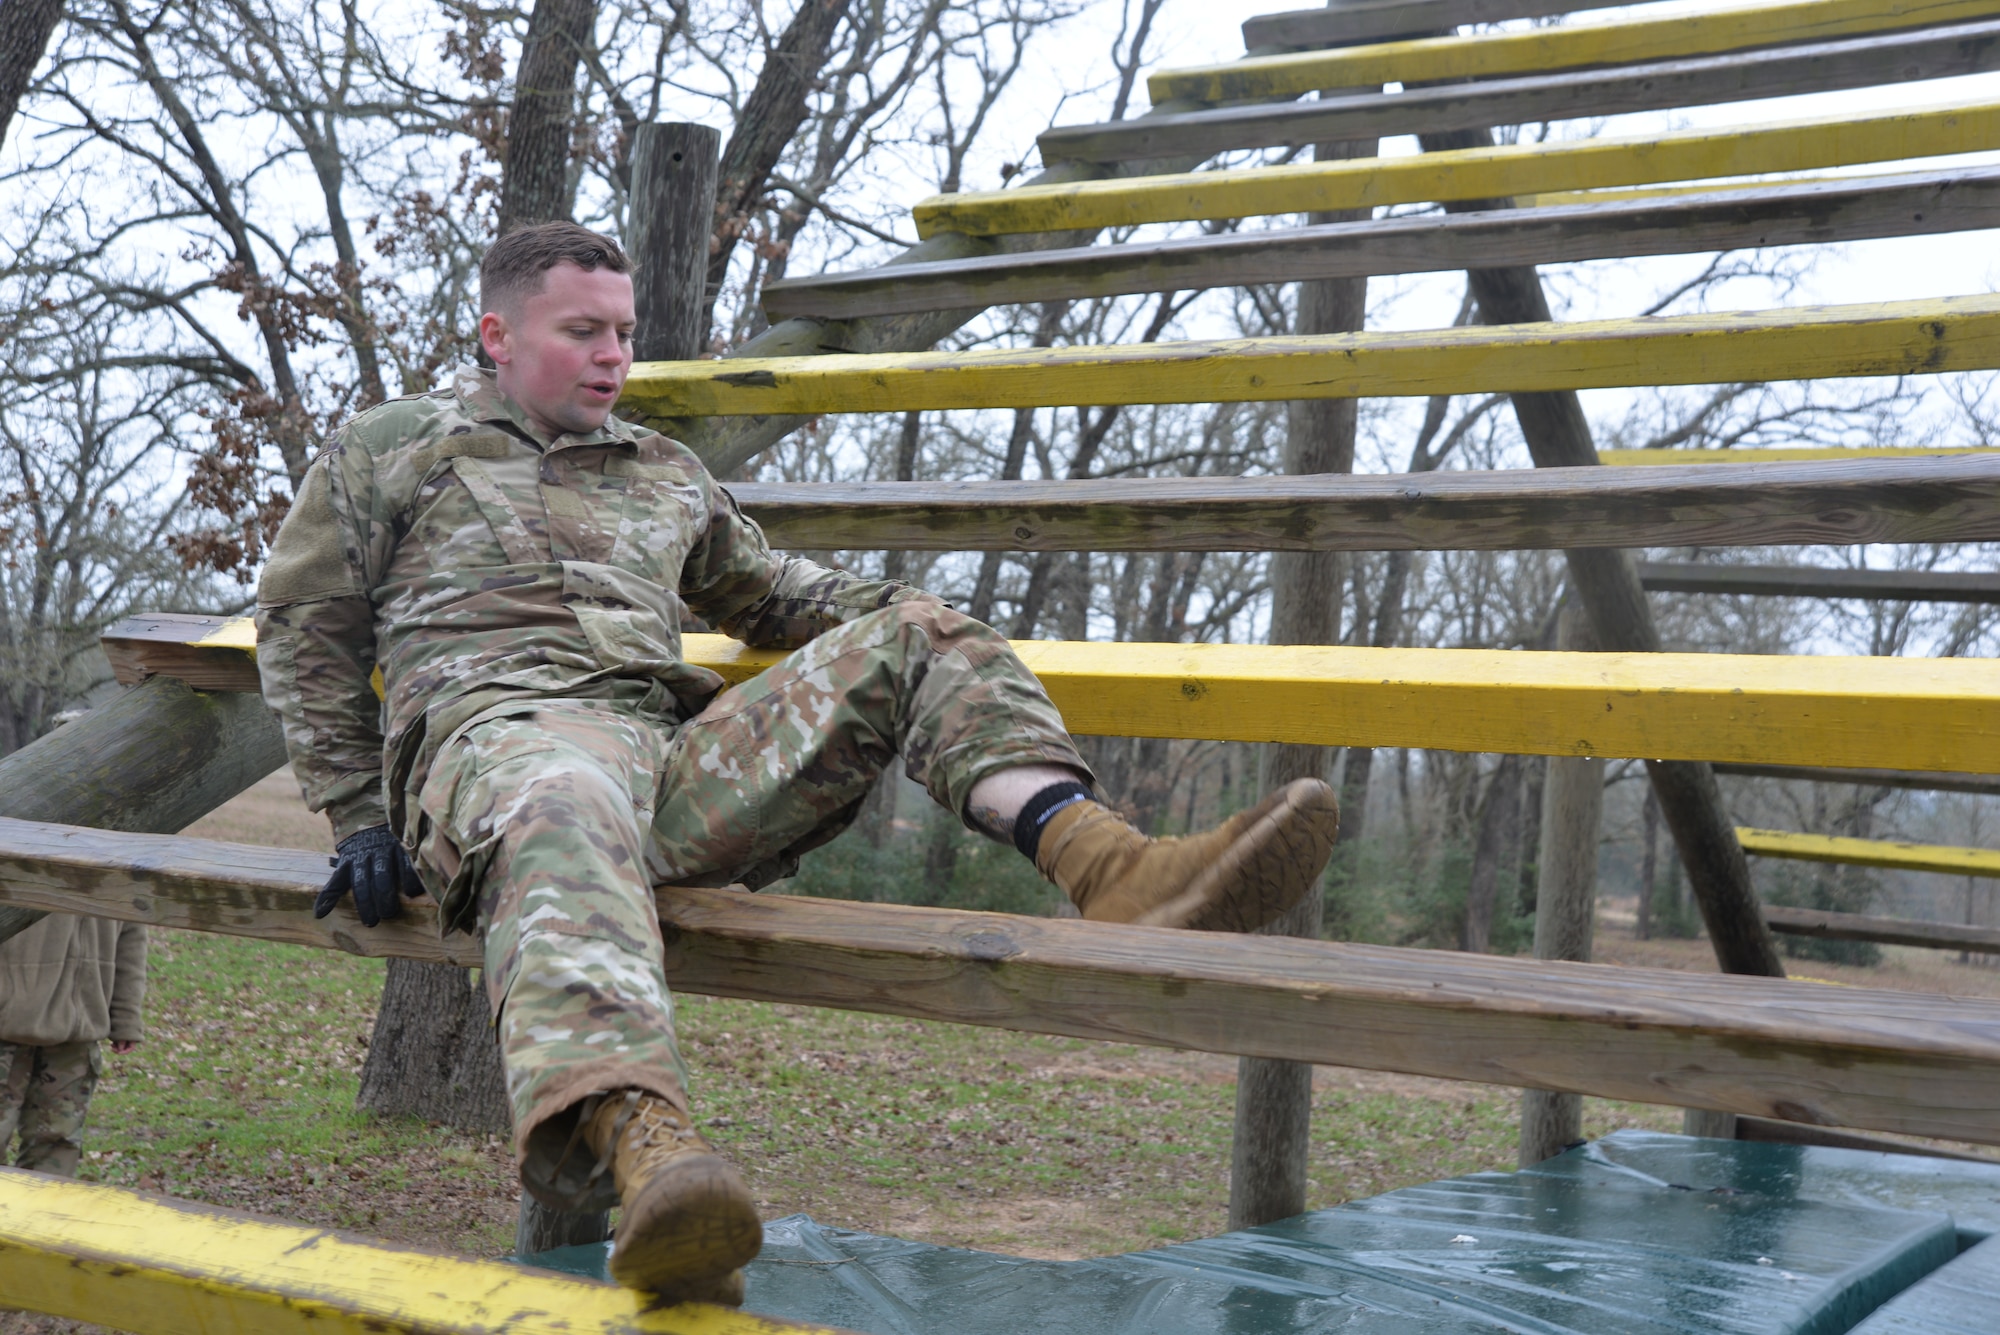 Spc. Tanner Rider, Texas Army National Guard, works his way over and under the wooden beams during the obstacle course portion of the Texas National Guard’s 2019 Best Warrior Competition at Camp Swift Feb. 28, 2019. Over the span of 24 hours, the competitors have been put through an obstacle course, nighttime navigation, a 12-mile ruck march wearing a 35-pound ruck sack and performing a modified Army physical fitness test which consisted of pushups, sit-ups, and a four-mile run. (Texas Air National Guard photo by Senior Airman Bryan Swink)